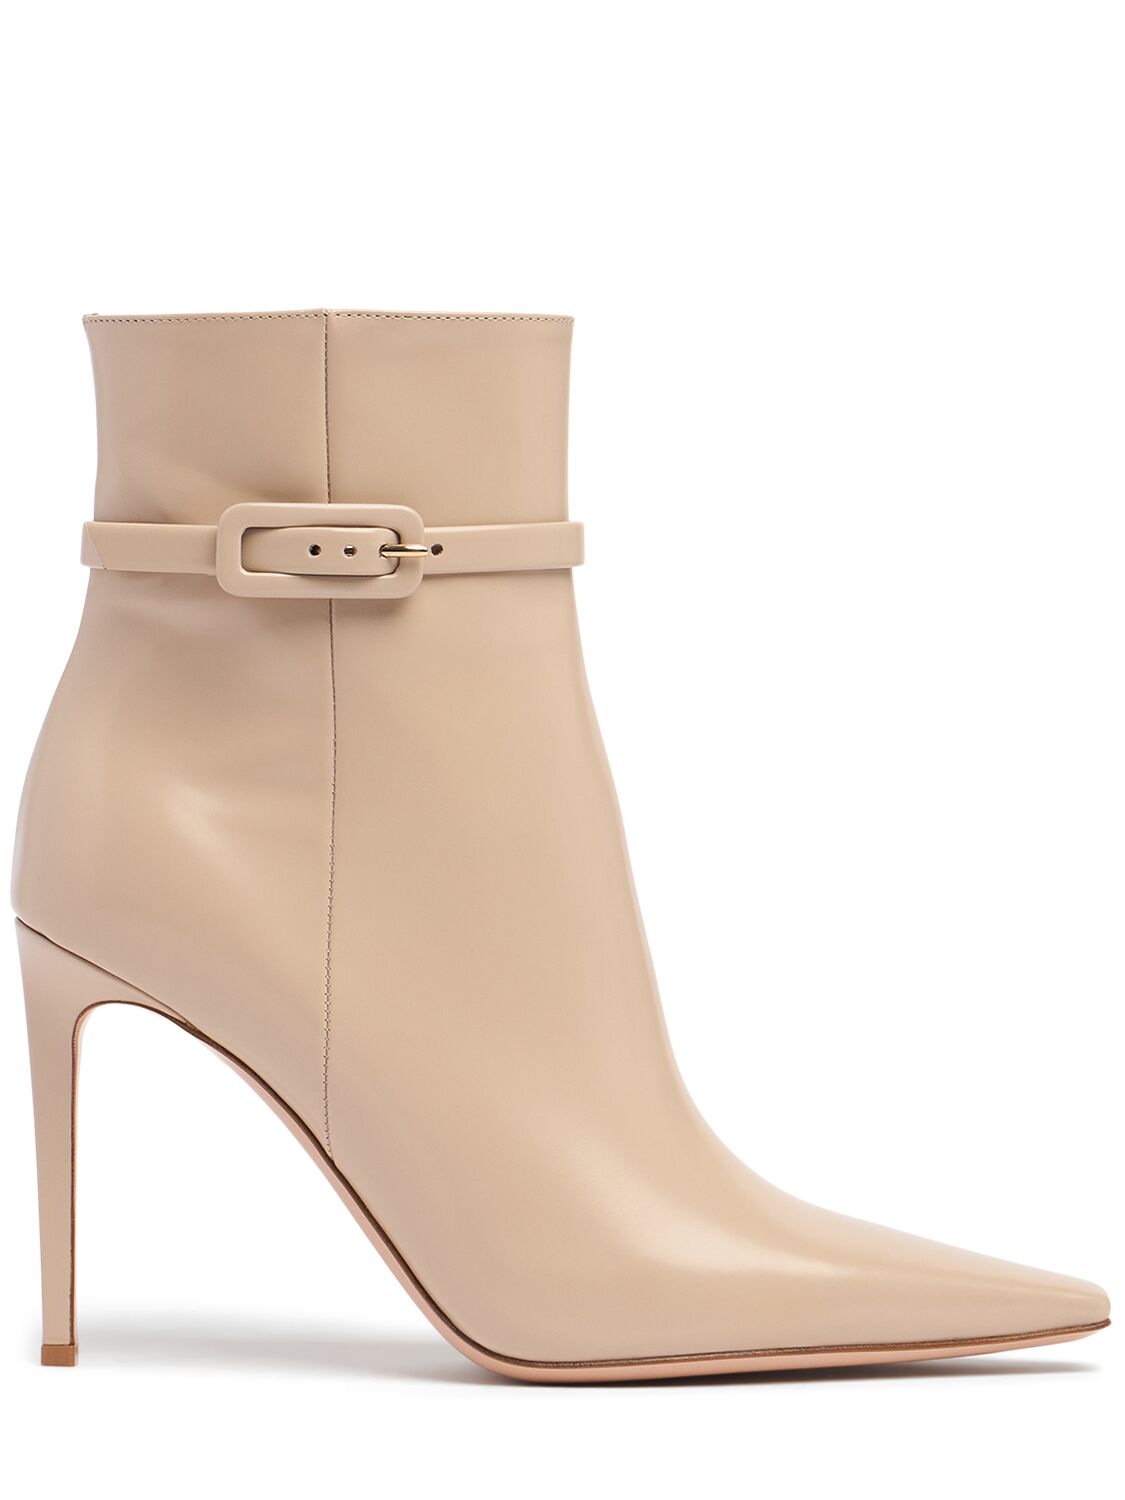 Gianvito Rossi 95mm Tokio Brushed Leather Boots In Beige